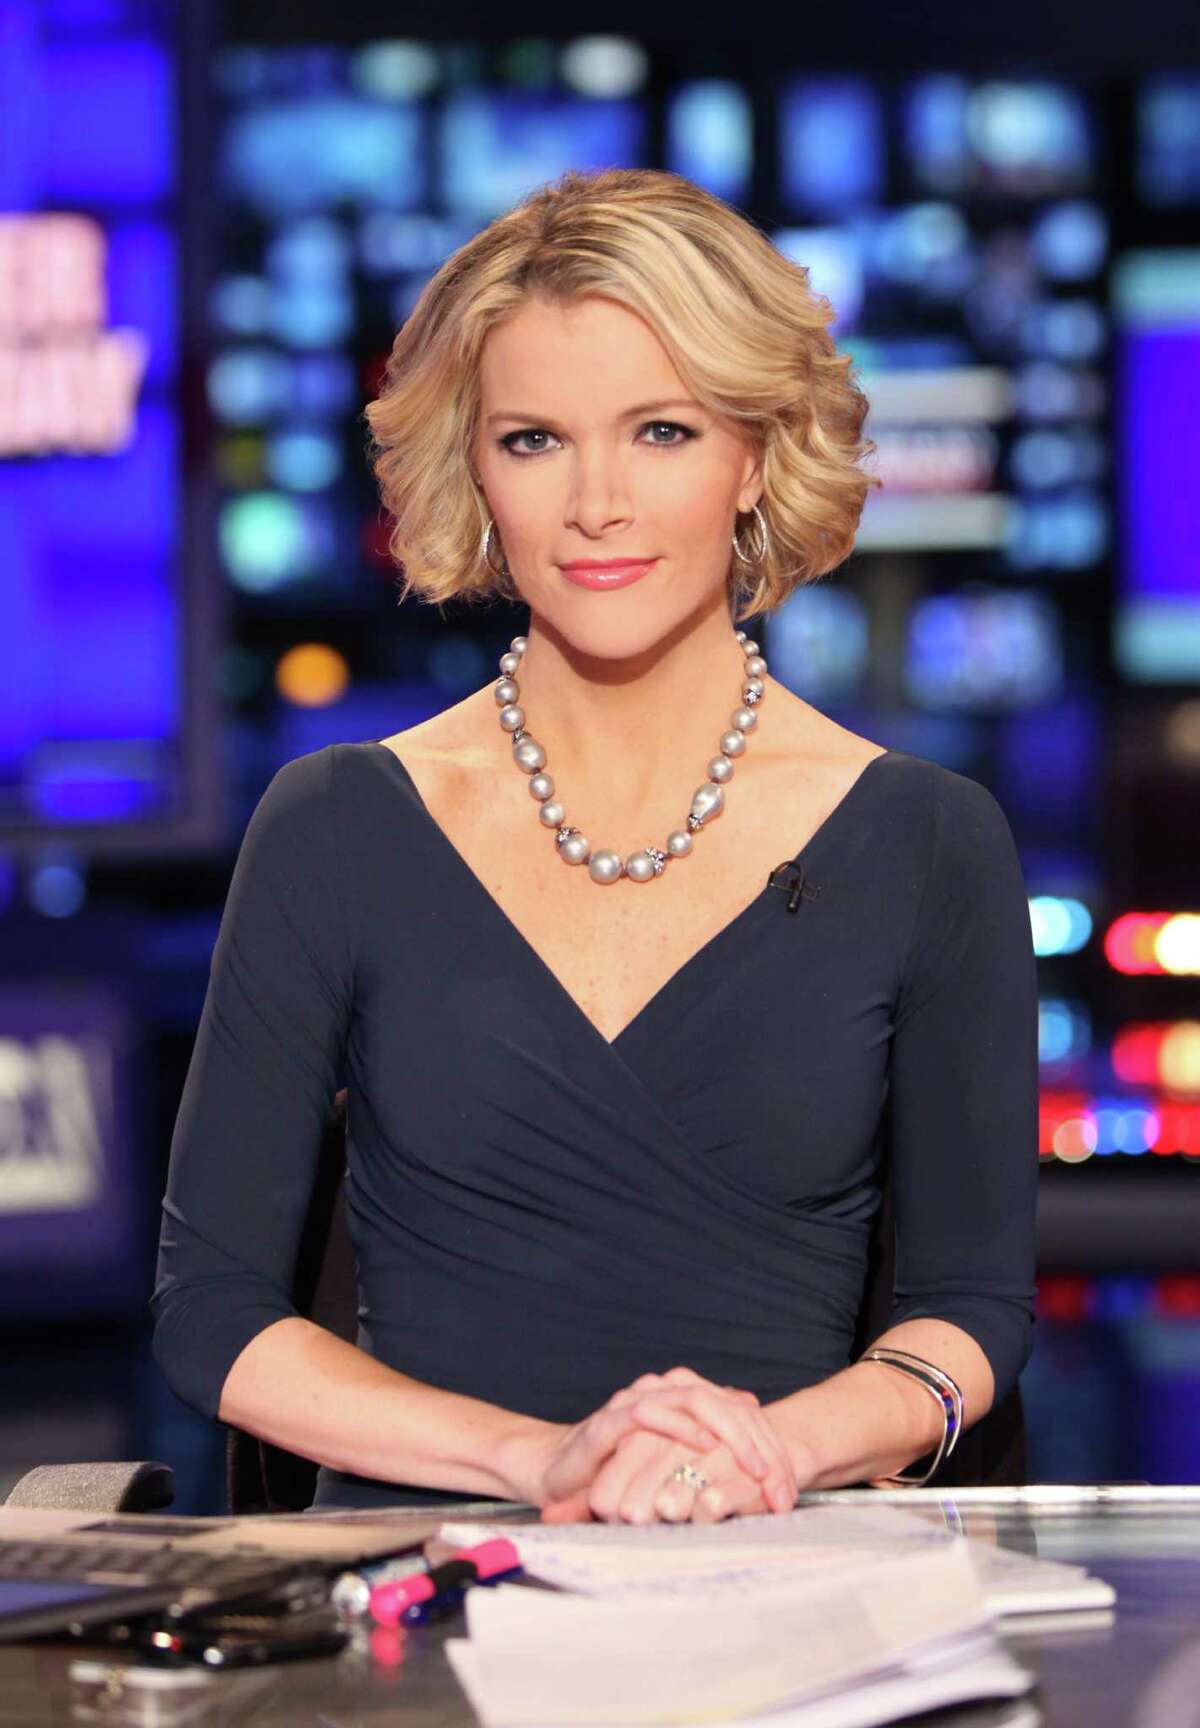 Megyn Kelly is serving as co-anchor for Fox News during the Republican National Convention in Tampa, Fla.